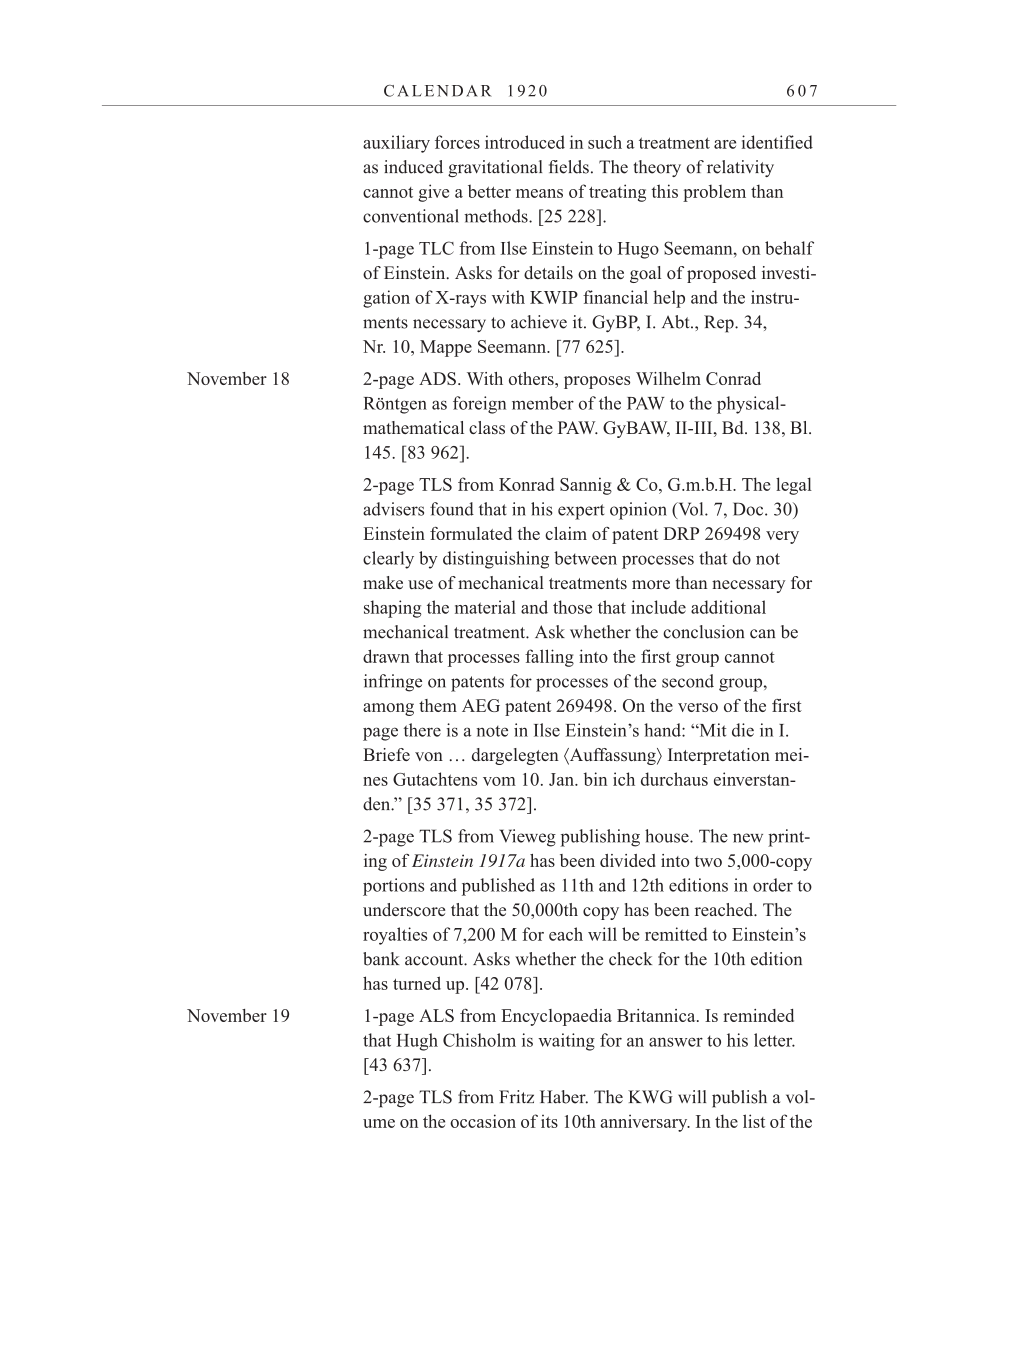 Volume 10: The Berlin Years: Correspondence May-December 1920 / Supplementary Correspondence 1909-1920 page 607